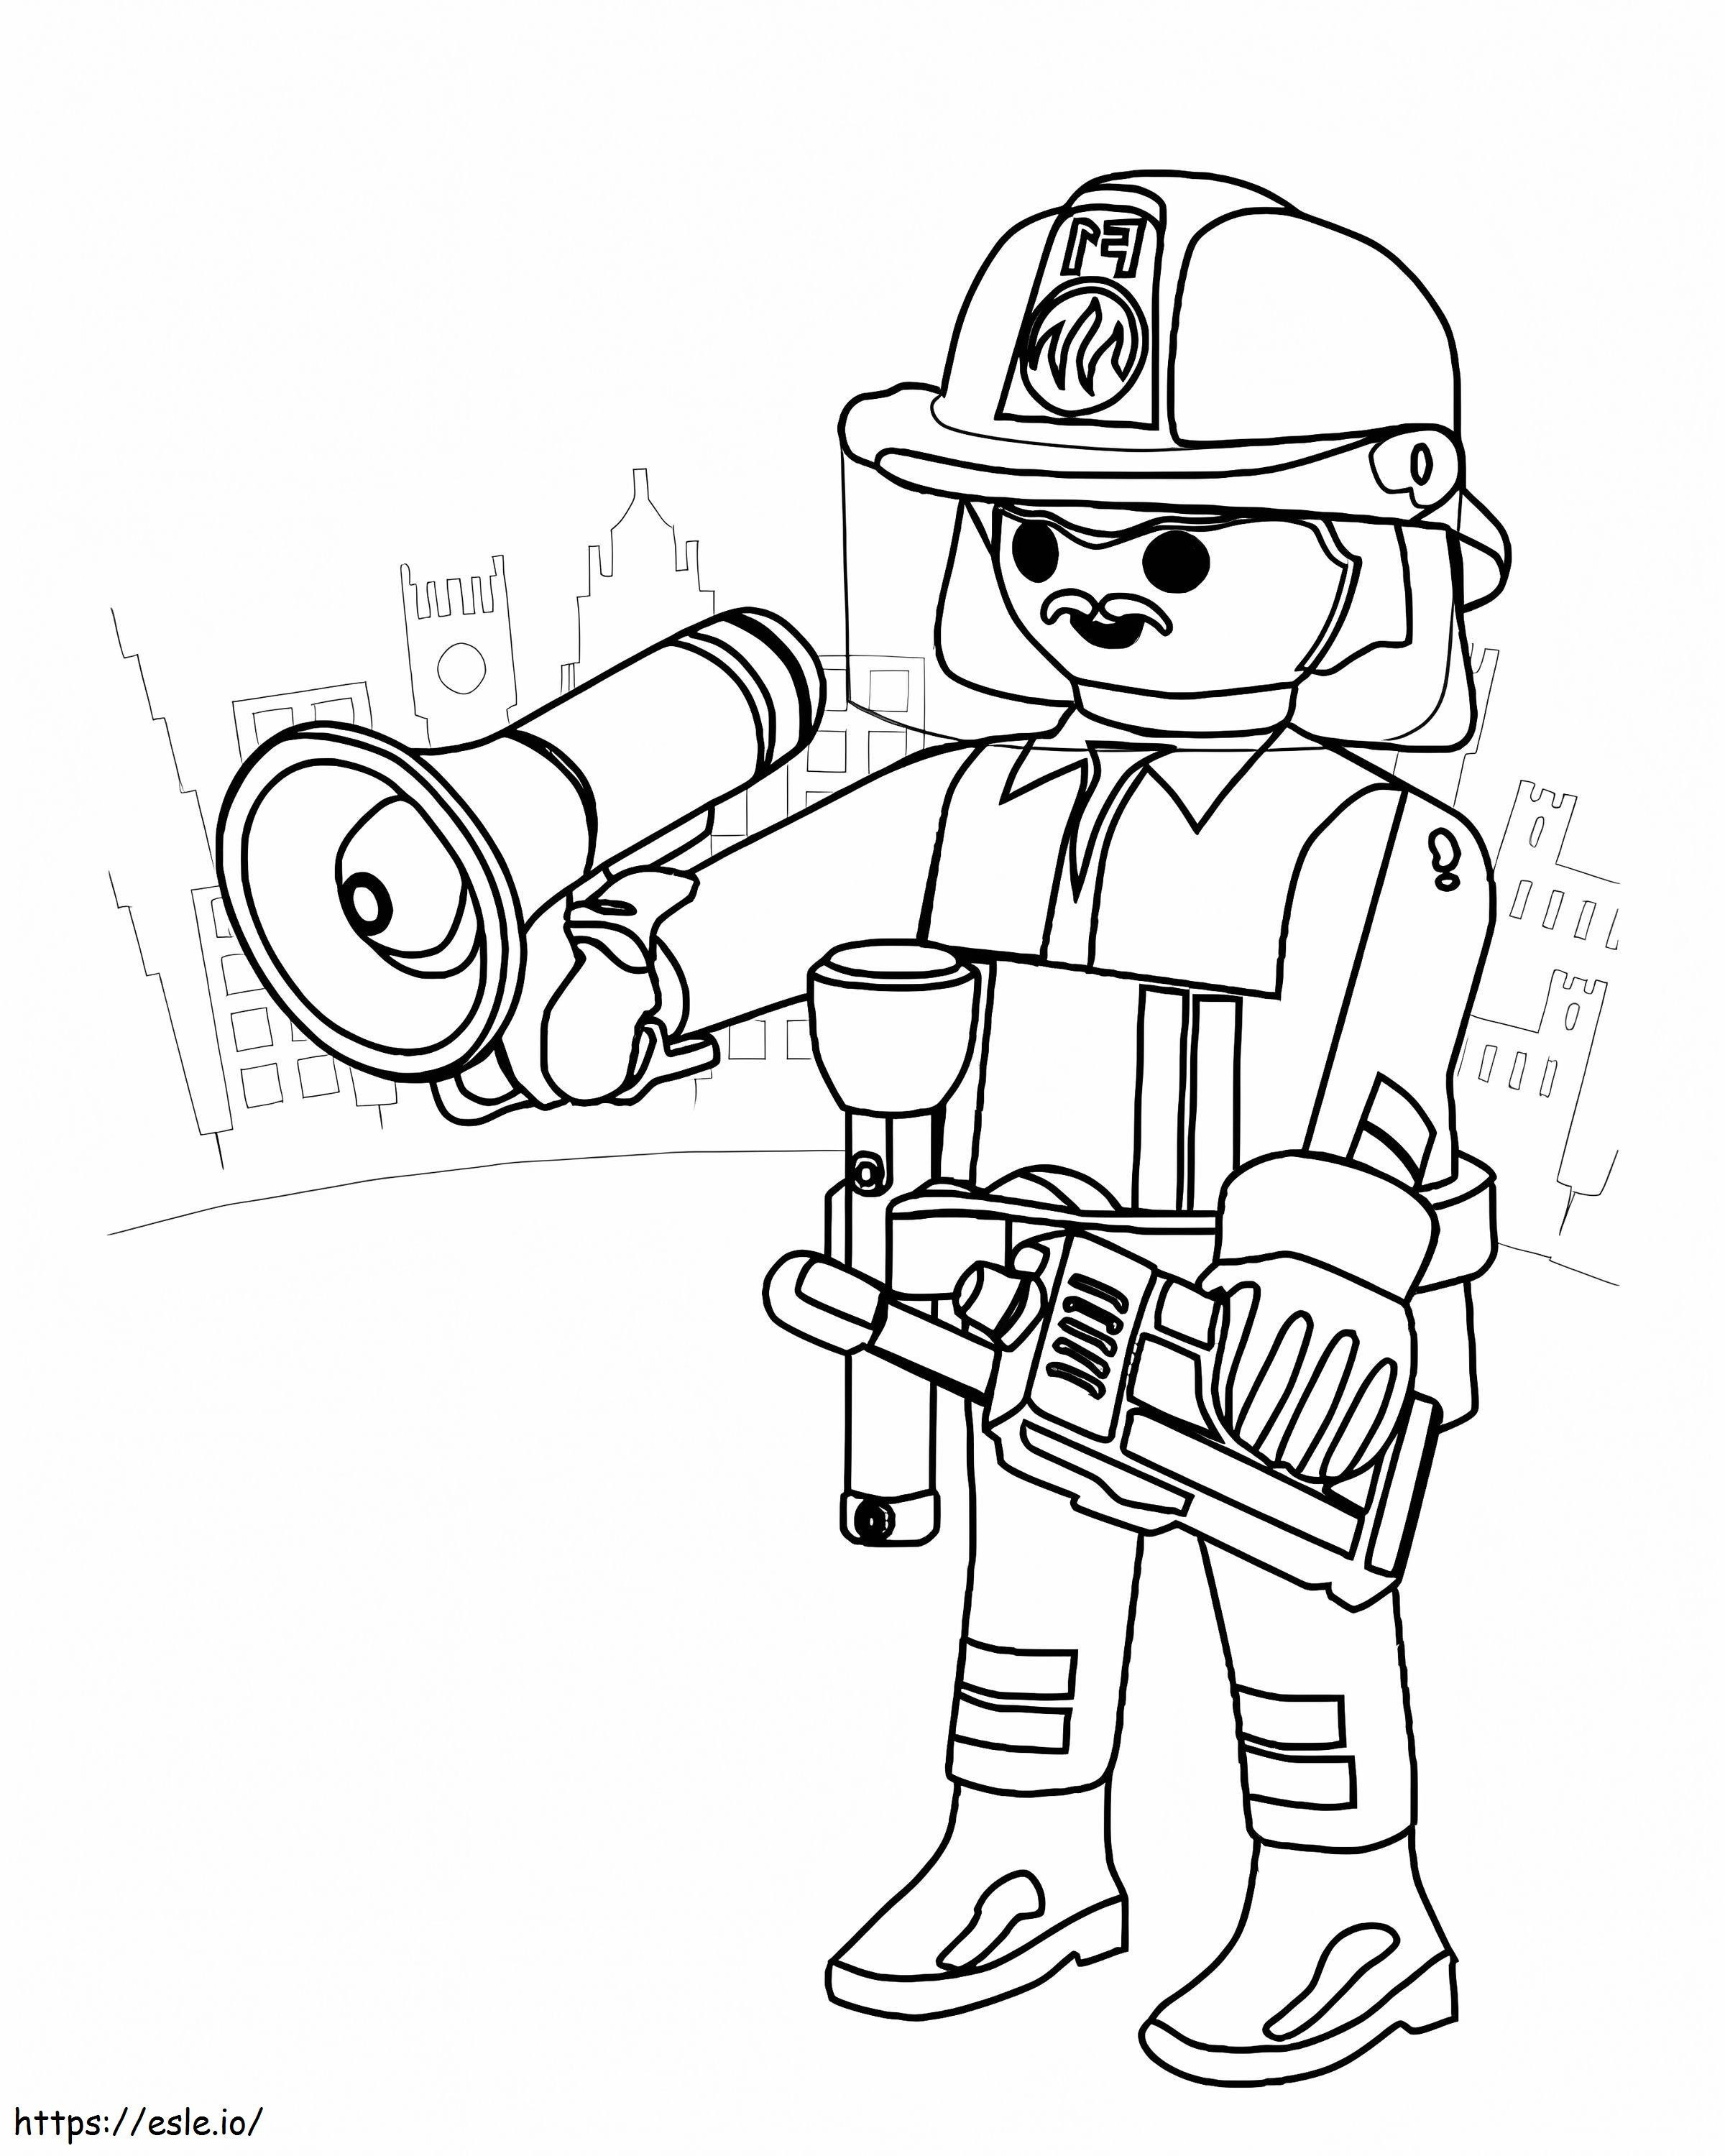 Firefighter Playmobil coloring page